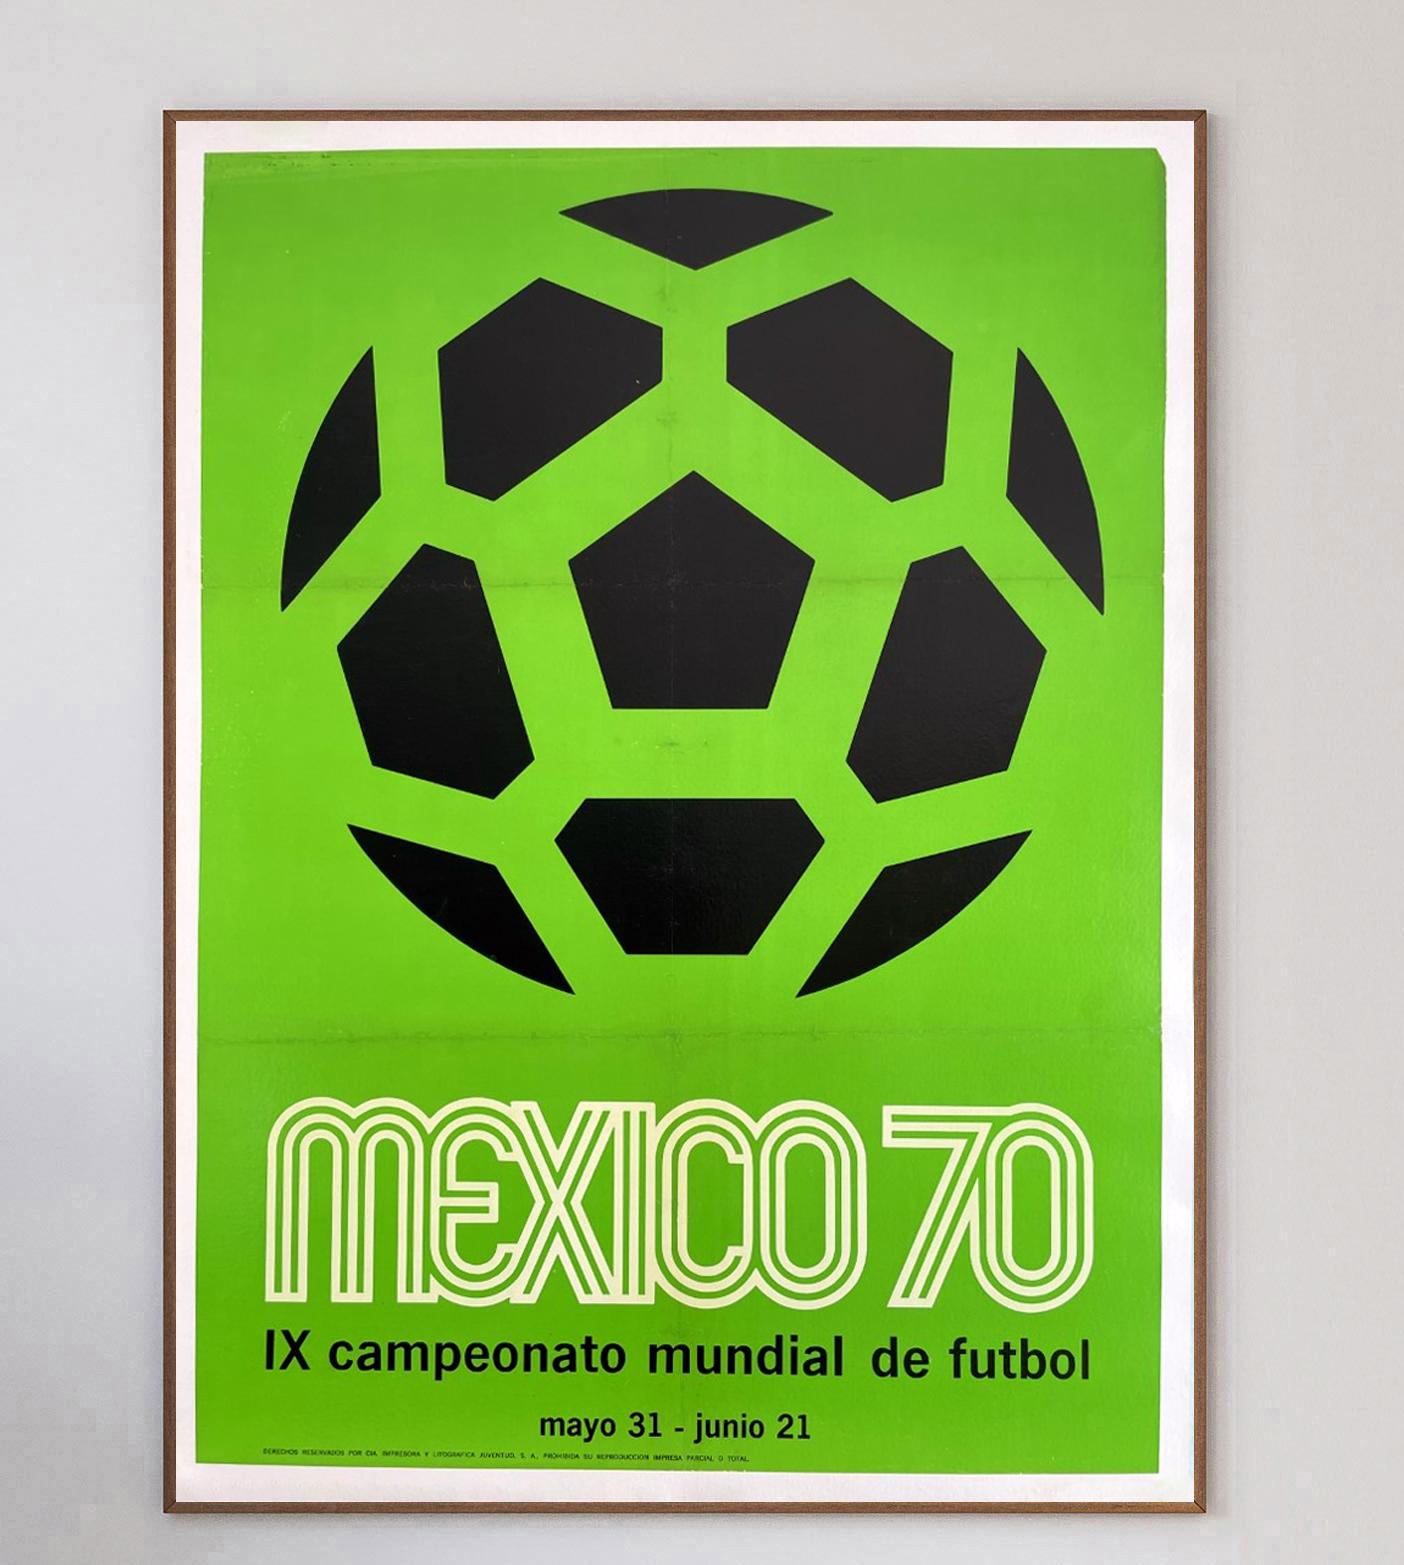 The 1970 FIFA World Cup was hosted by Mexico from 31st May – 21st June, and was the 9th edition of the quadrennial event. It was the first event to be held in North America, and was a huge success, with games breaking television records. Regarded as